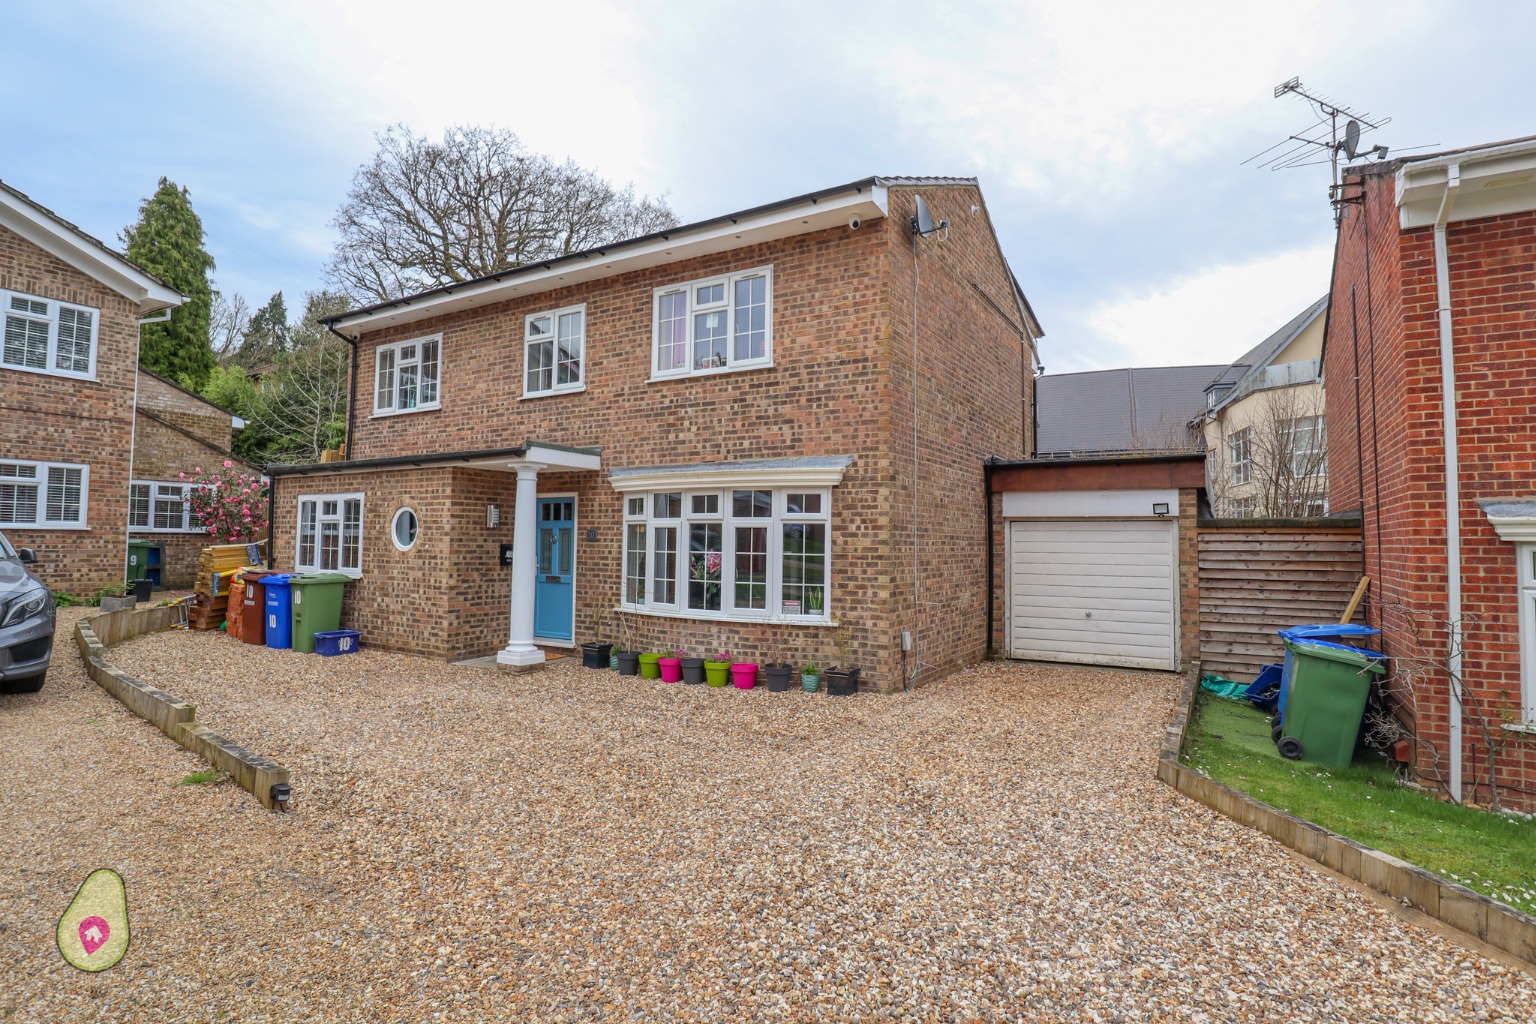 4 bed detached house for sale in Woodlands Close, Camberley - Property Image 1